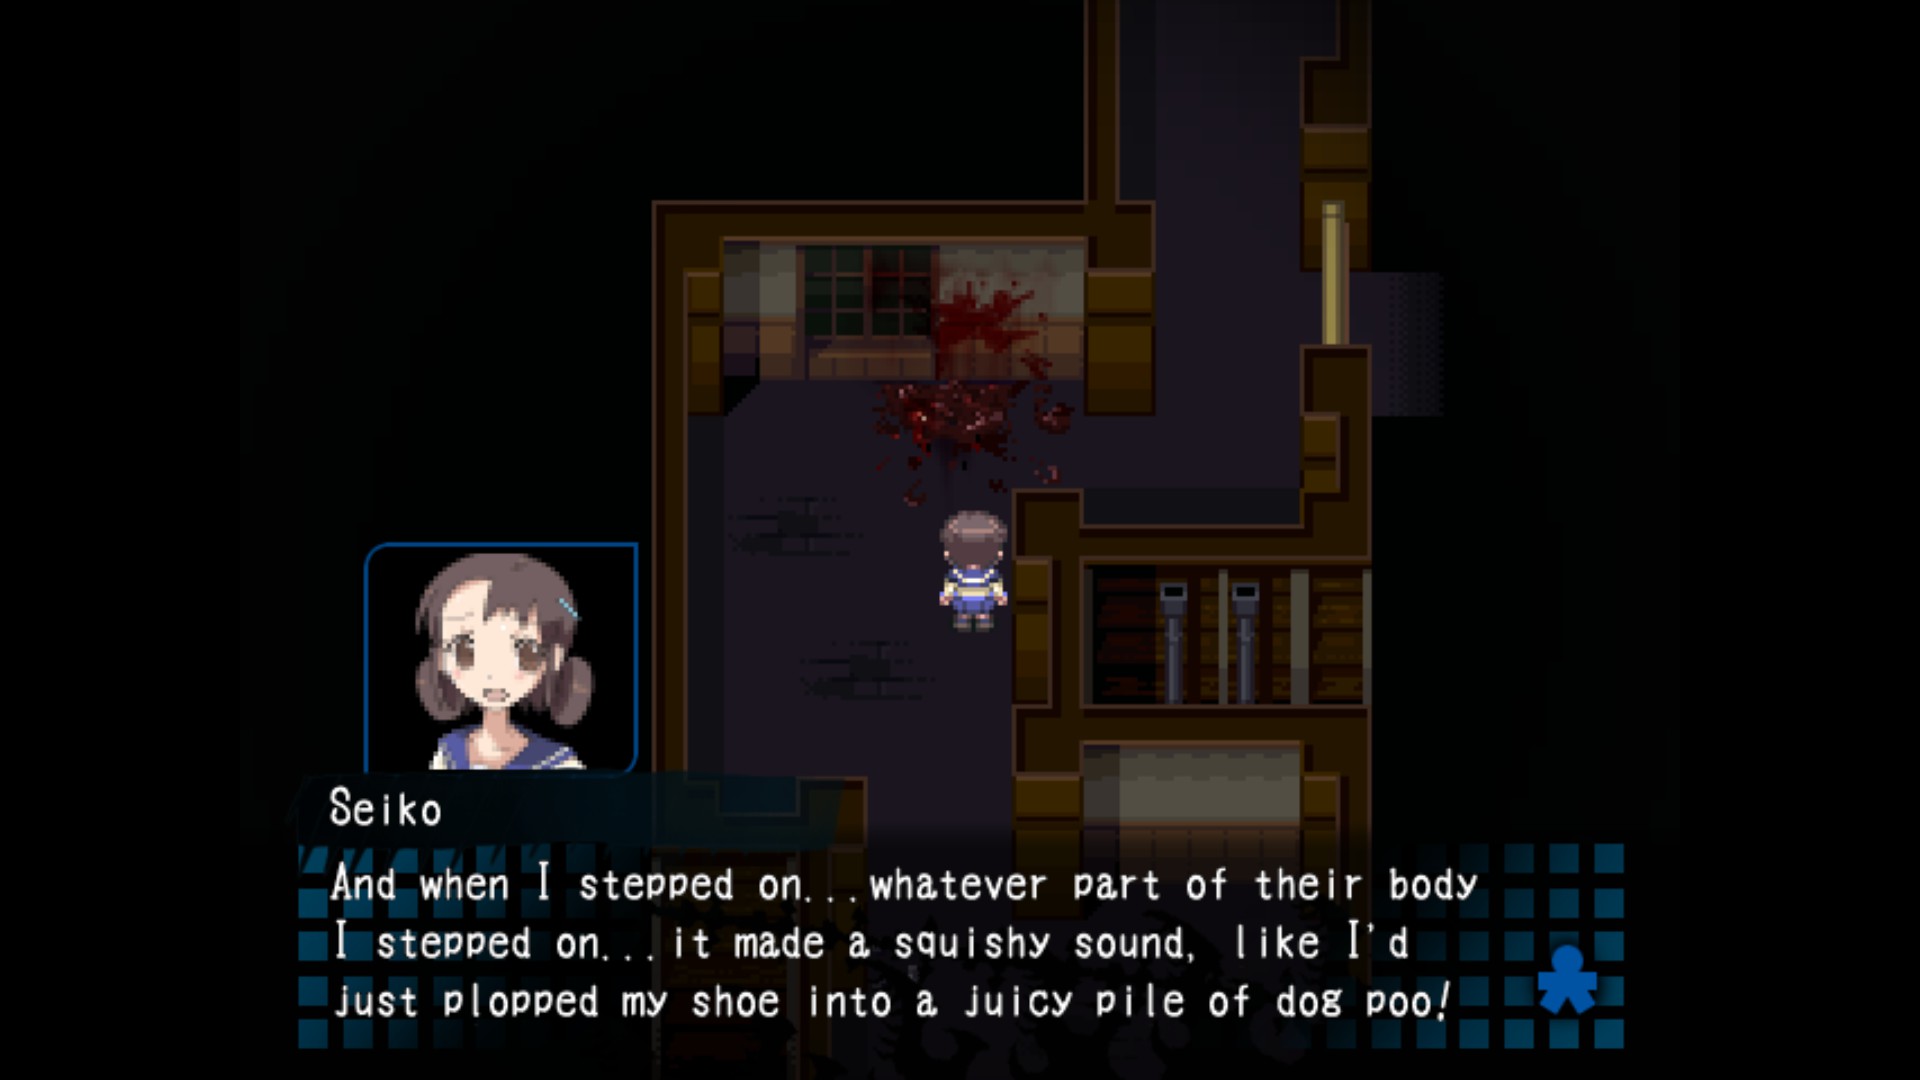 Corpse Party Background